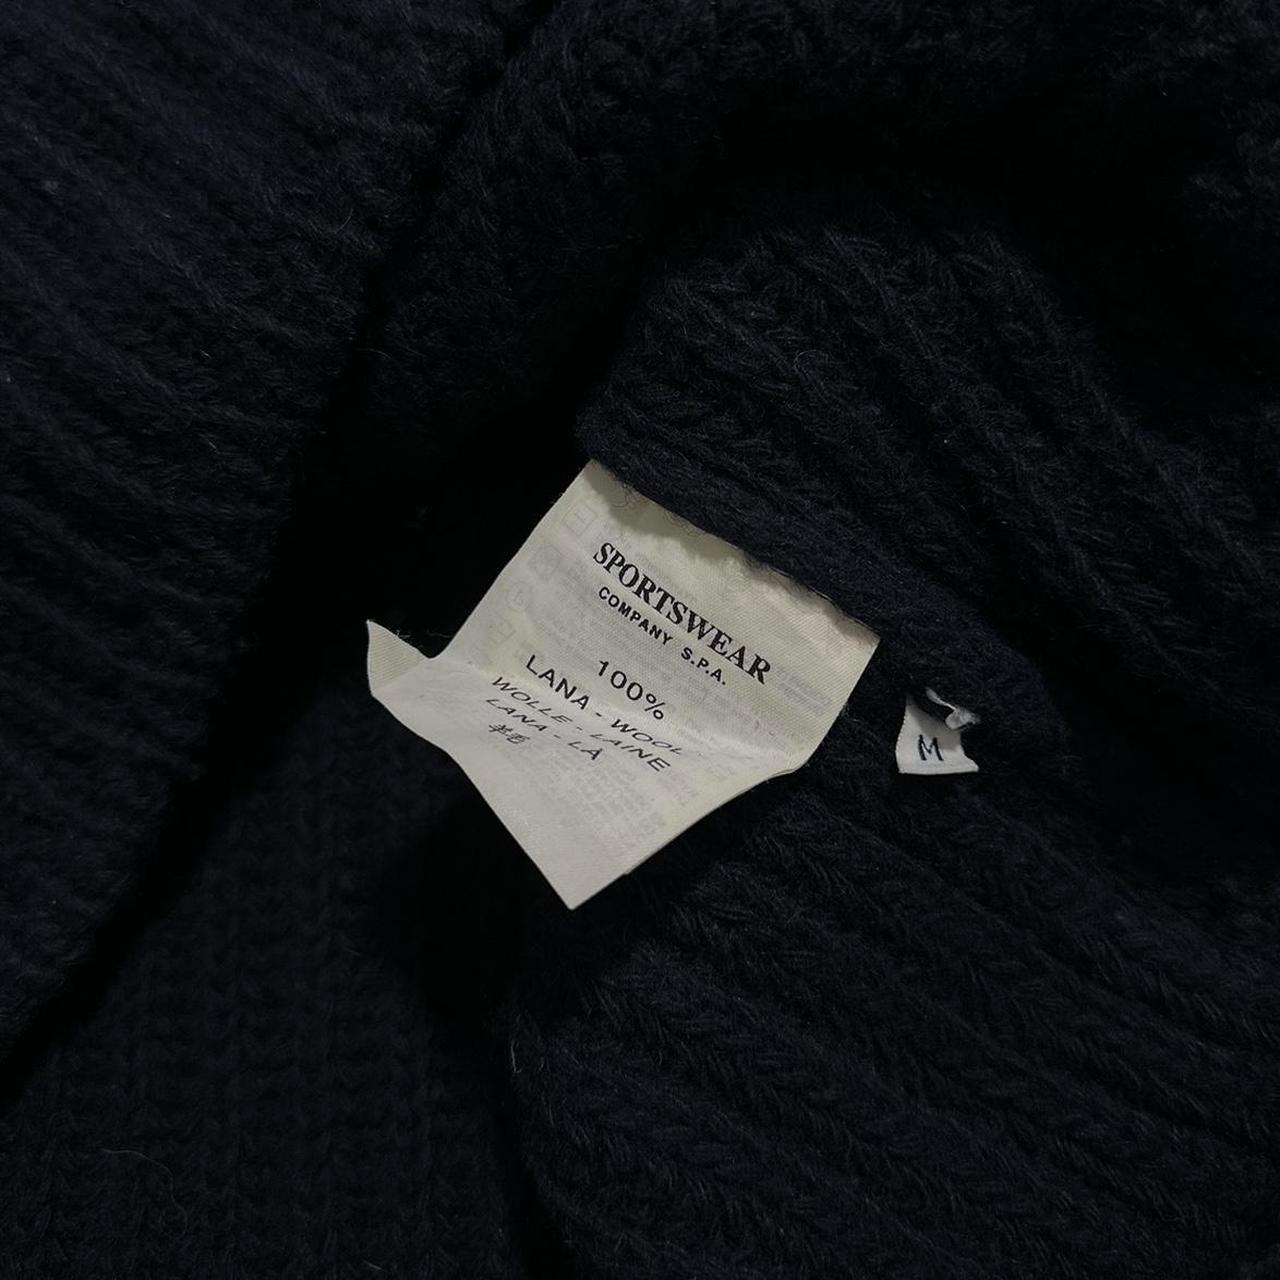 Stone Island A/W 2001 Heavy Knit Pullover Jumper - Known Source